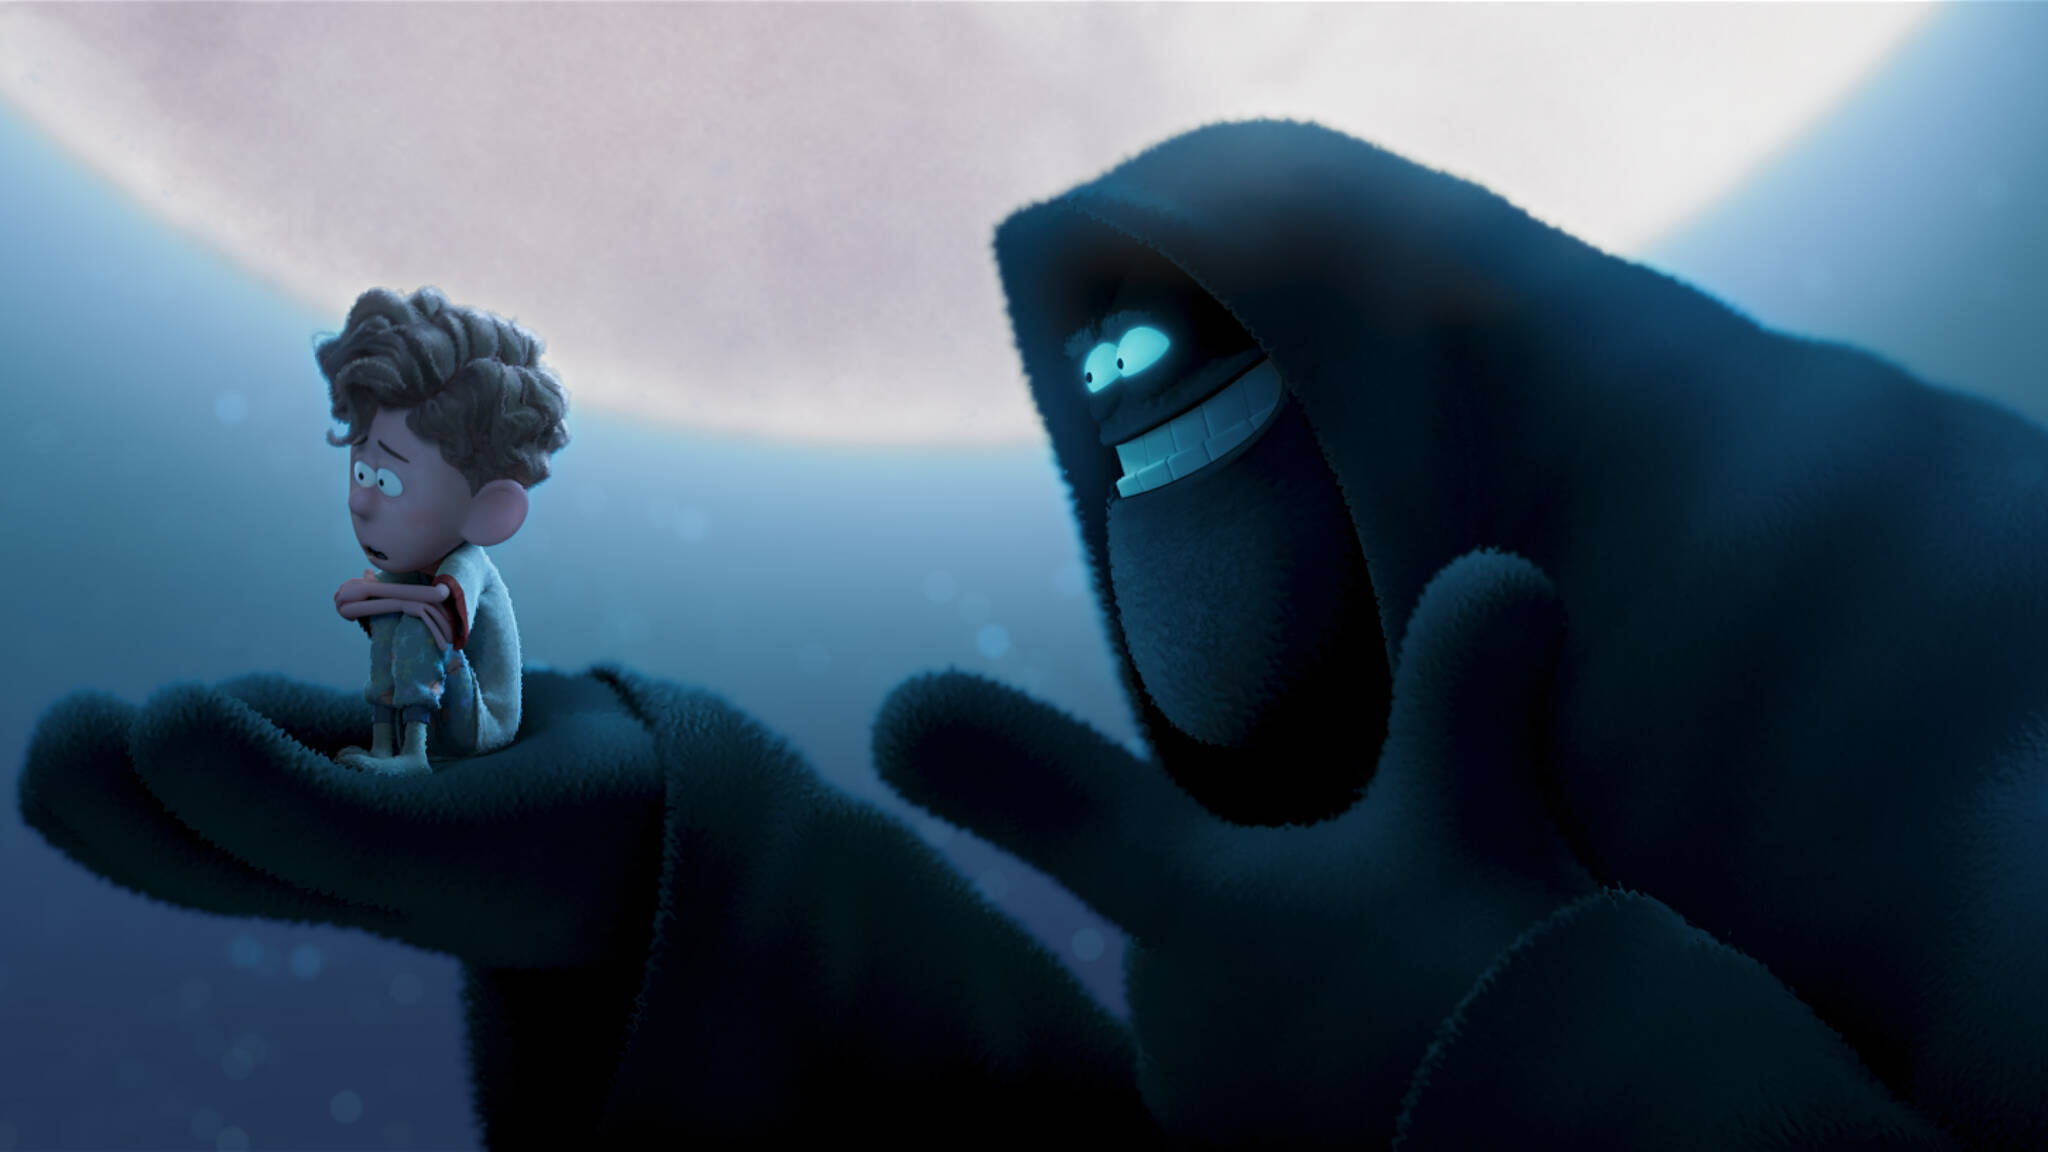 Orion (Jacob Tremblay) and Dark (Paul Walter Hauser) in “Orion and the Dark.” (Promotional photo provided by Dreamworks Animation)